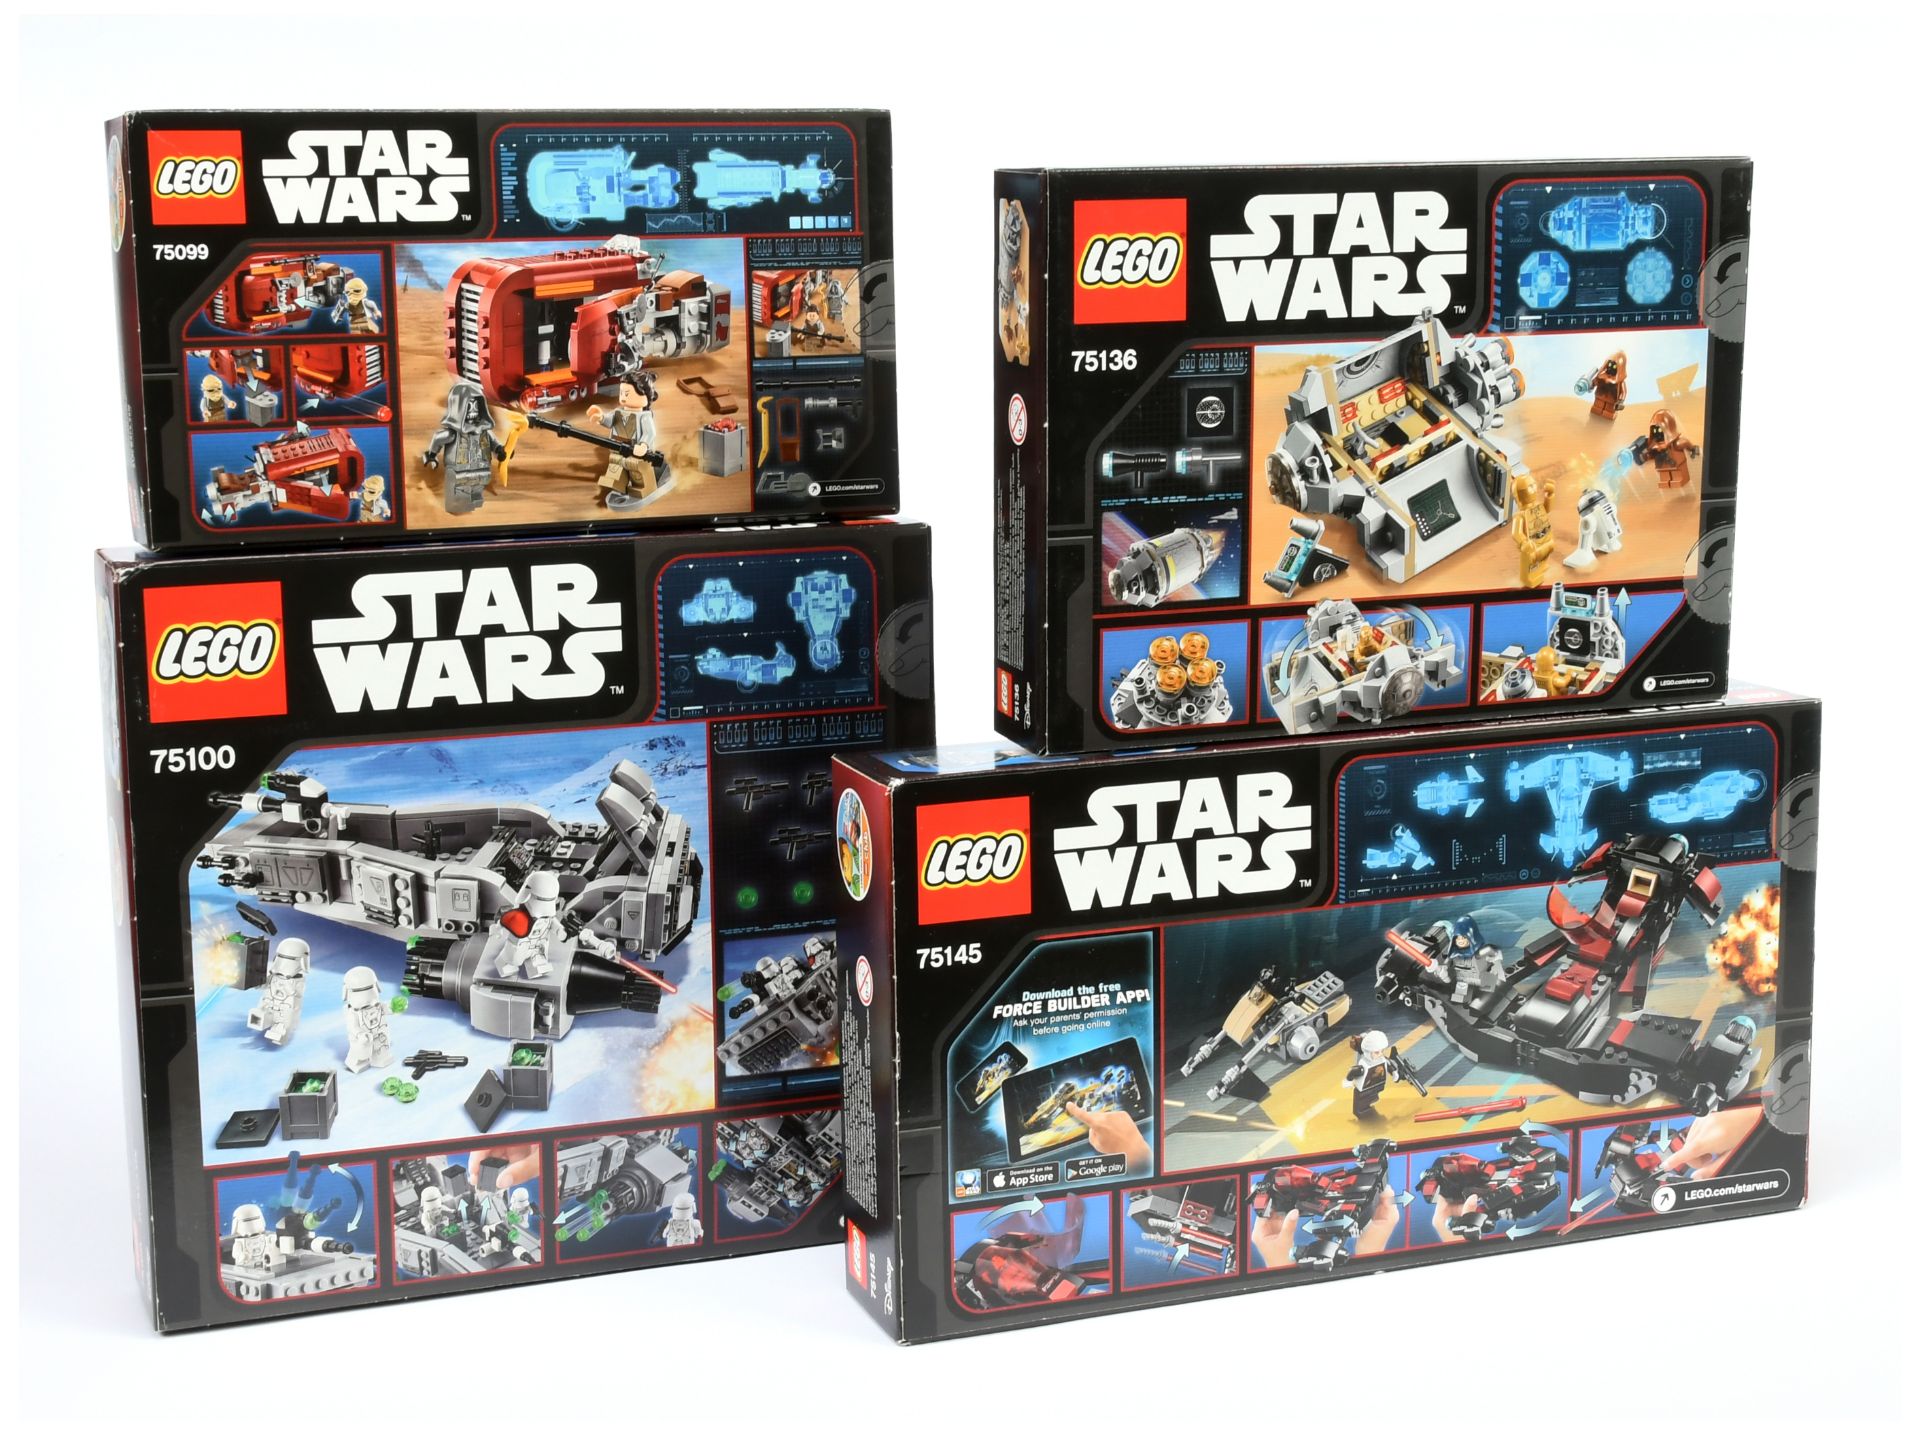 Lego Star Wars Group (1) 75100 First Order Snowspeeder (2) 75145 Eclispe Fighter (3) 75136 Droid ... - Image 2 of 2